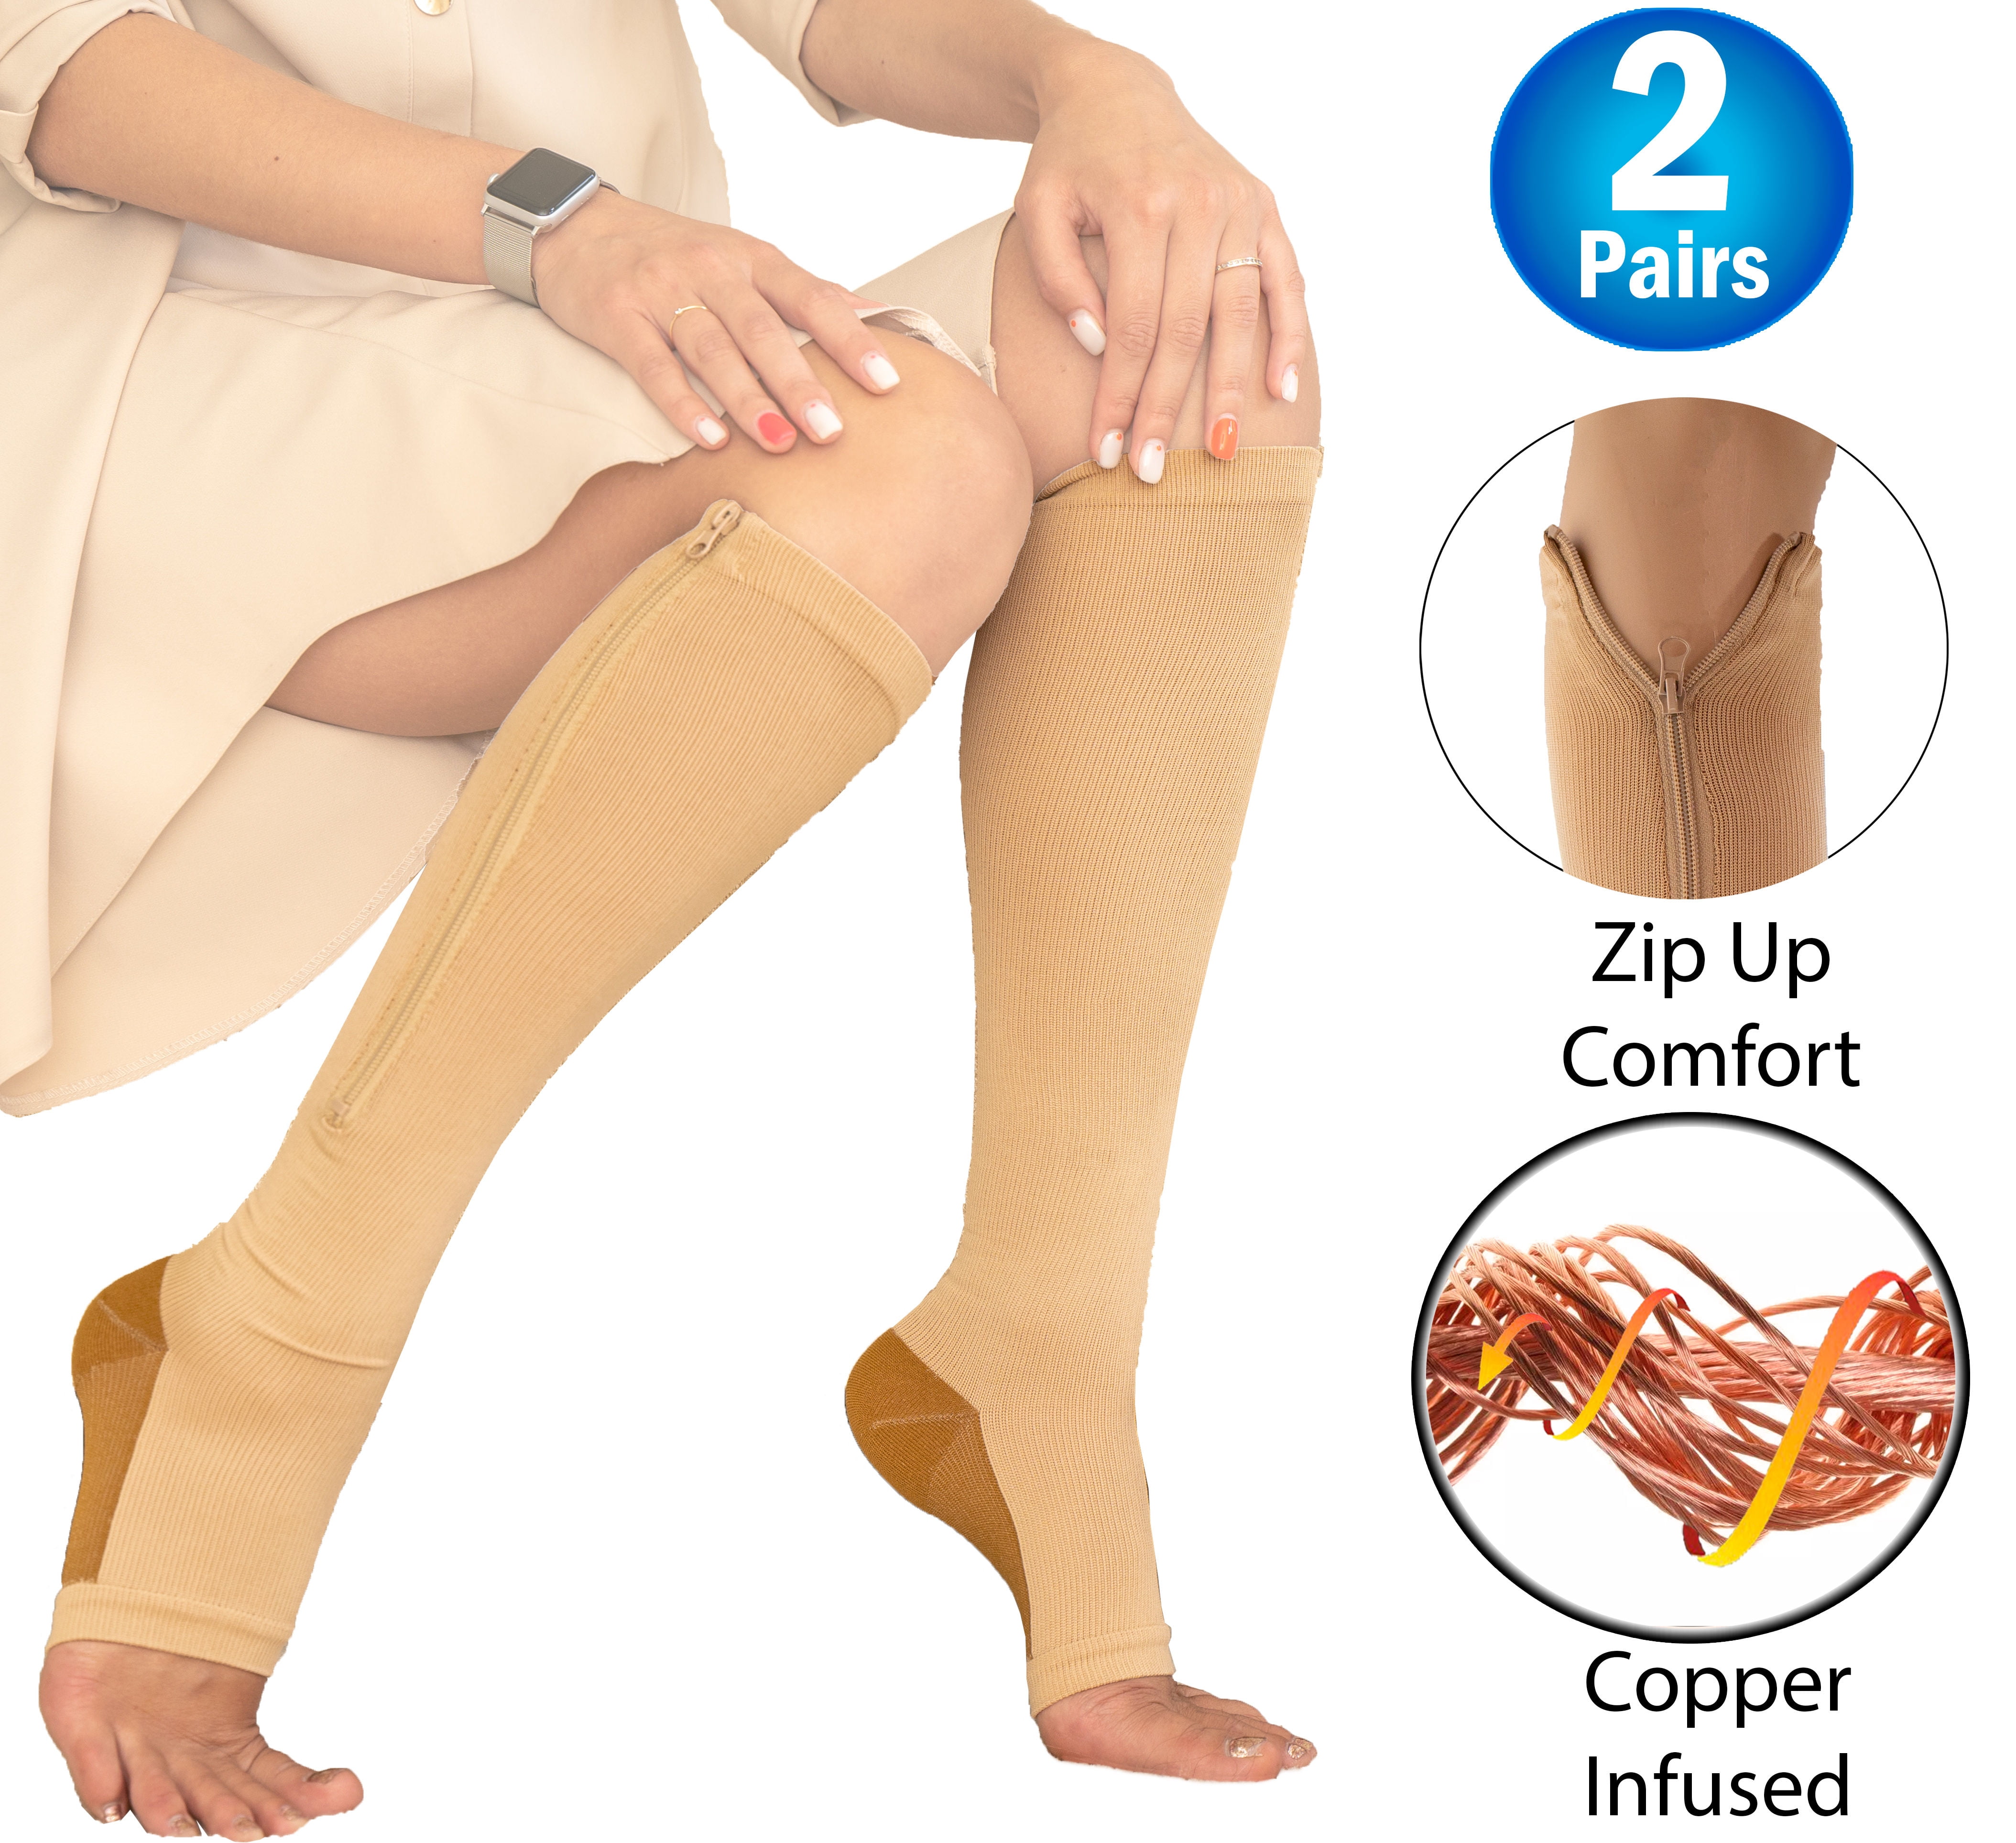 2 Copper Zipper Compression Socks w/ Open Toe Knee High Support Stockings -  Soft, Breathable Compression Socks For Support, Reduce Swelling & Better